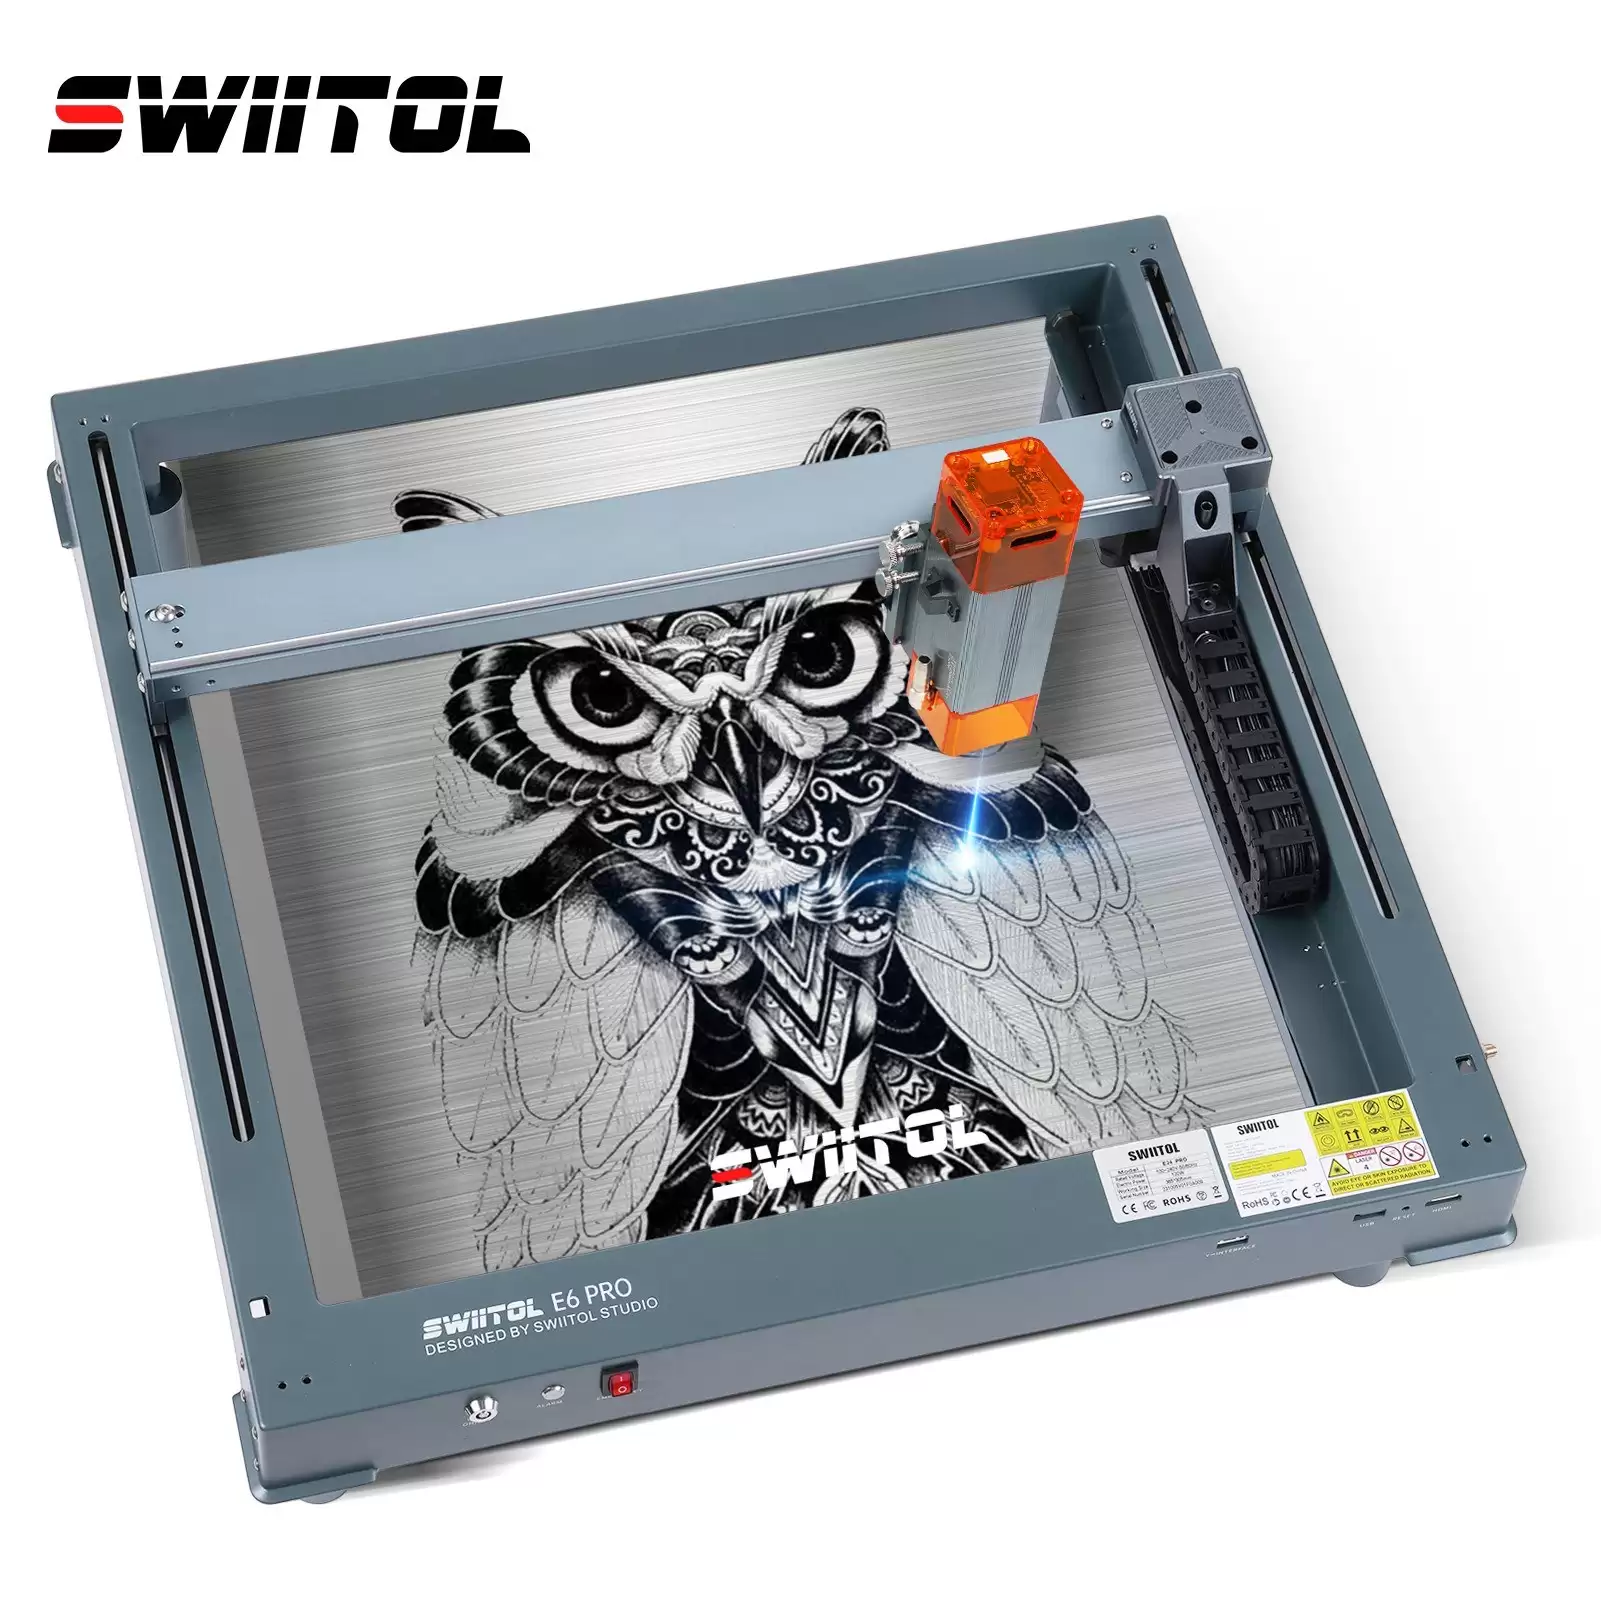 Pay Only $189 Swiitol For E6 Pro 6w Integrated Structure Laser Engraver With This Discount Coupon At Cafago